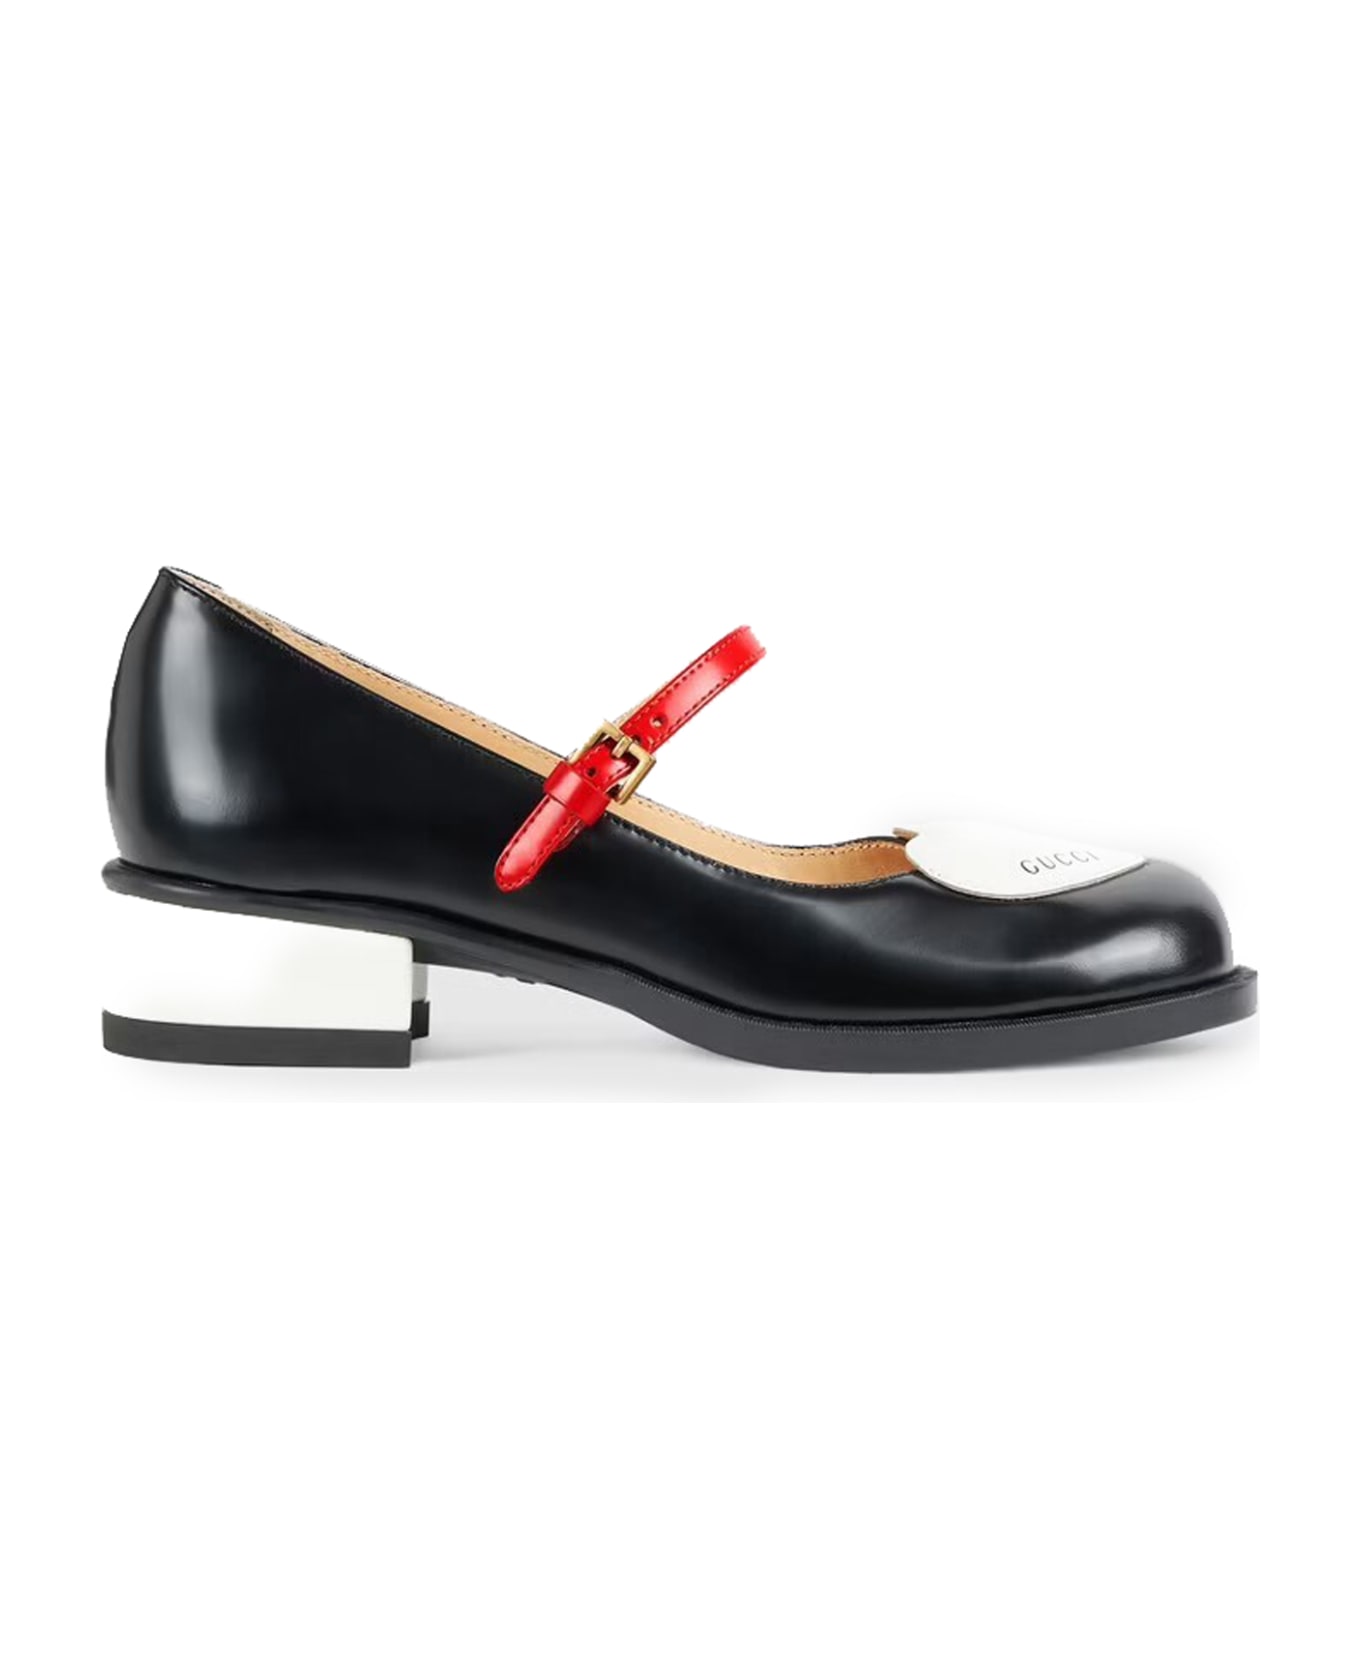 Gucci Leather Ballet Flats - Back